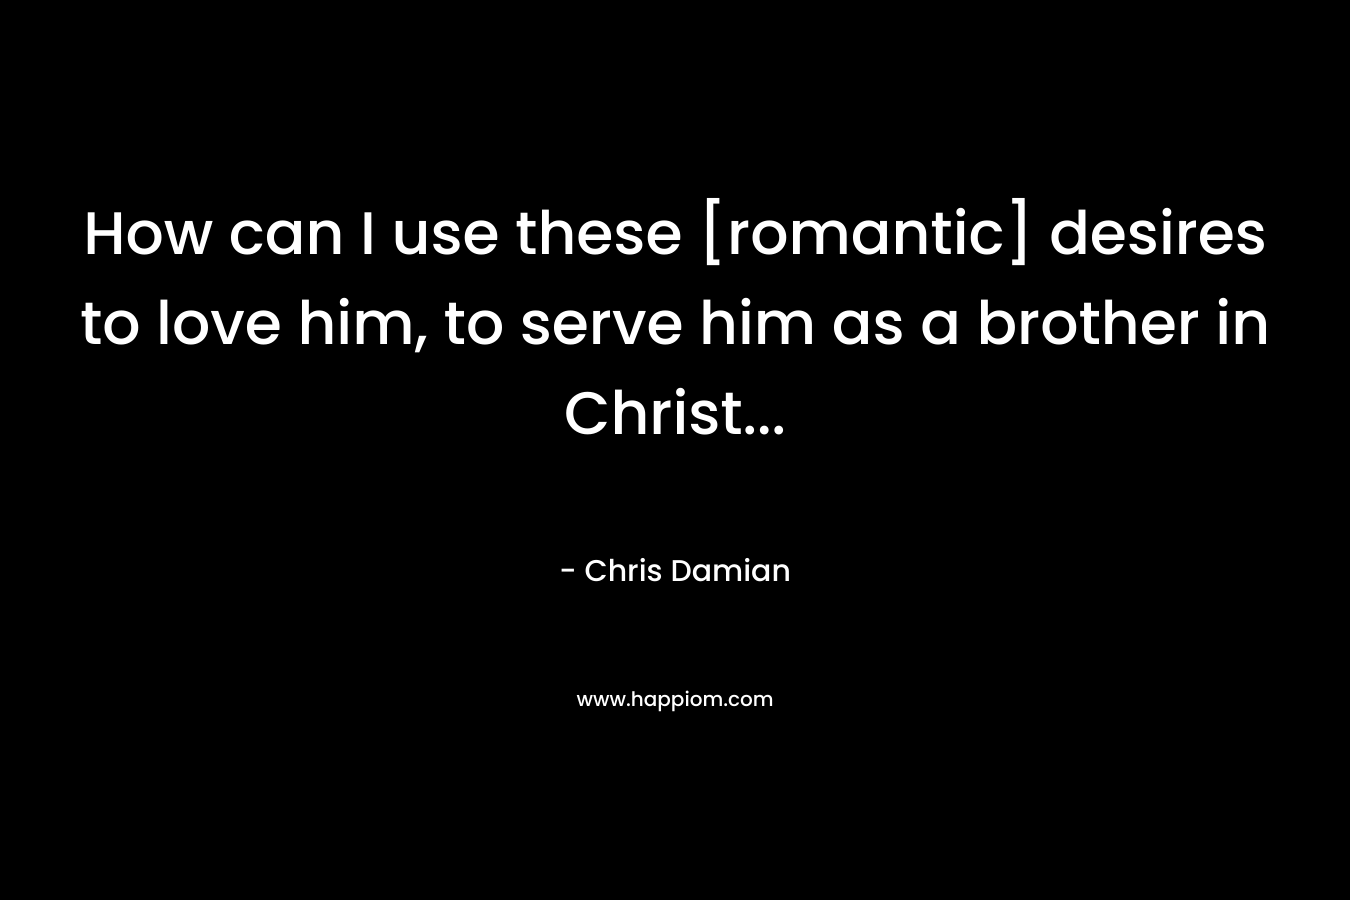 How can I use these [romantic] desires to love him, to serve him as a brother in Christ… – Chris Damian